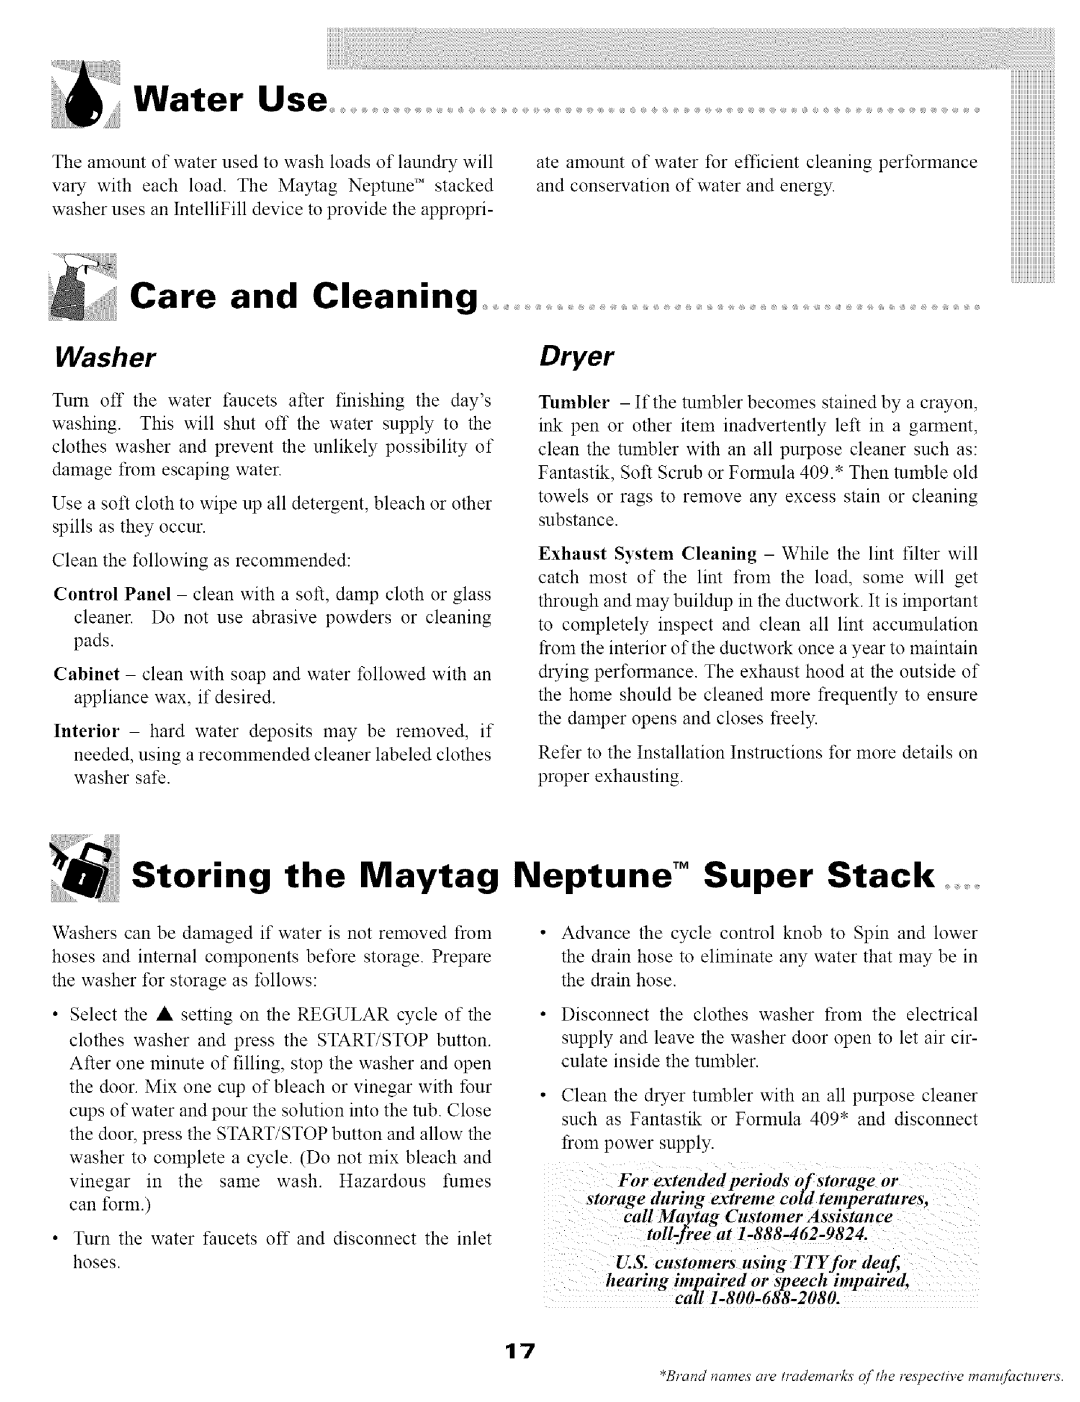 Maytag SL-3 warranty Care and Cleaning, Storing the Maytag Neptune TM Super Stack, Dryer, Washer, Water Use 